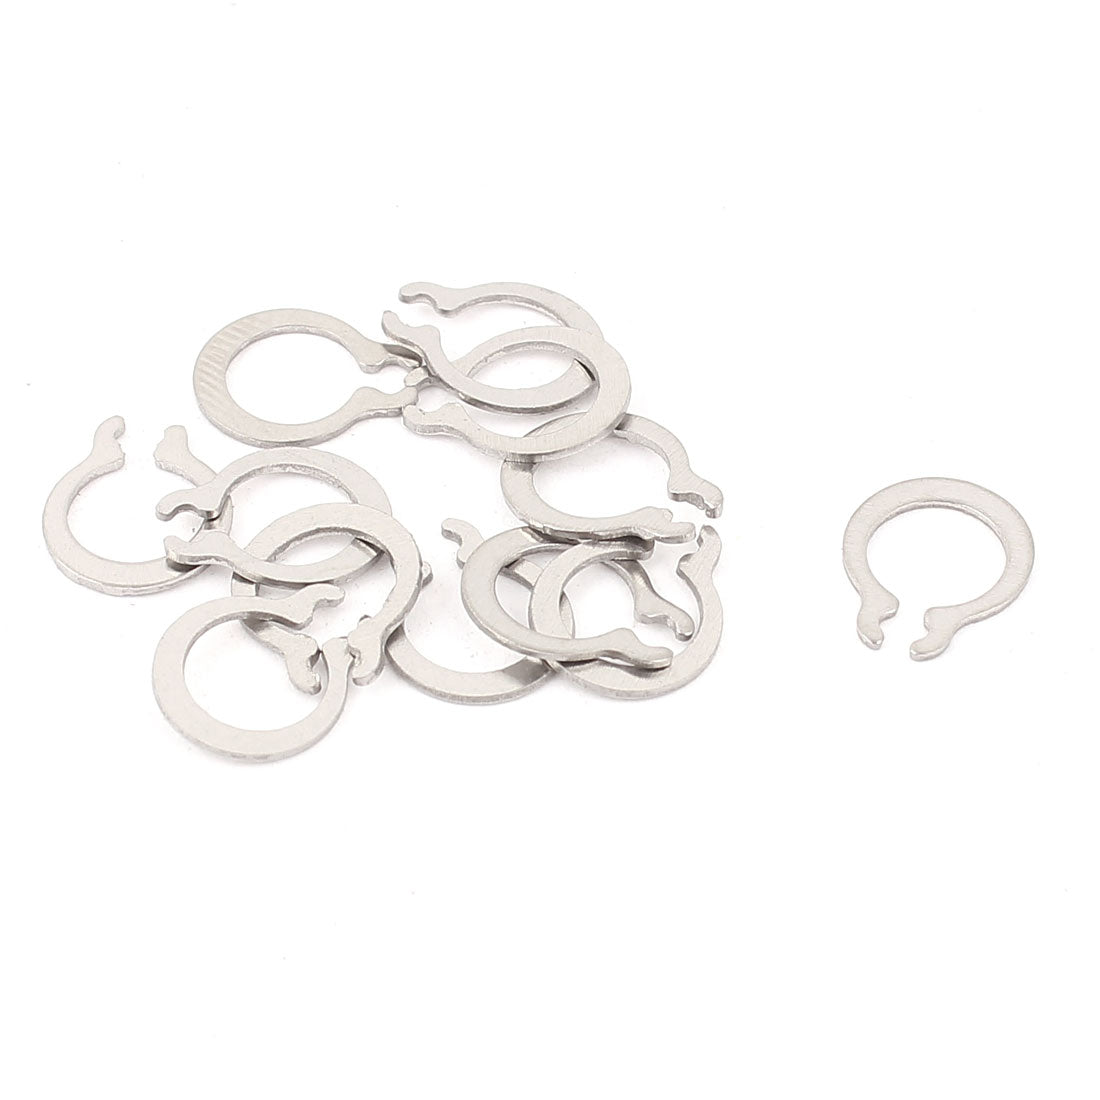 uxcell Uxcell 10pcs Plane Retaining Ring C-Clip for 7mm Rimfire Motor Shafts